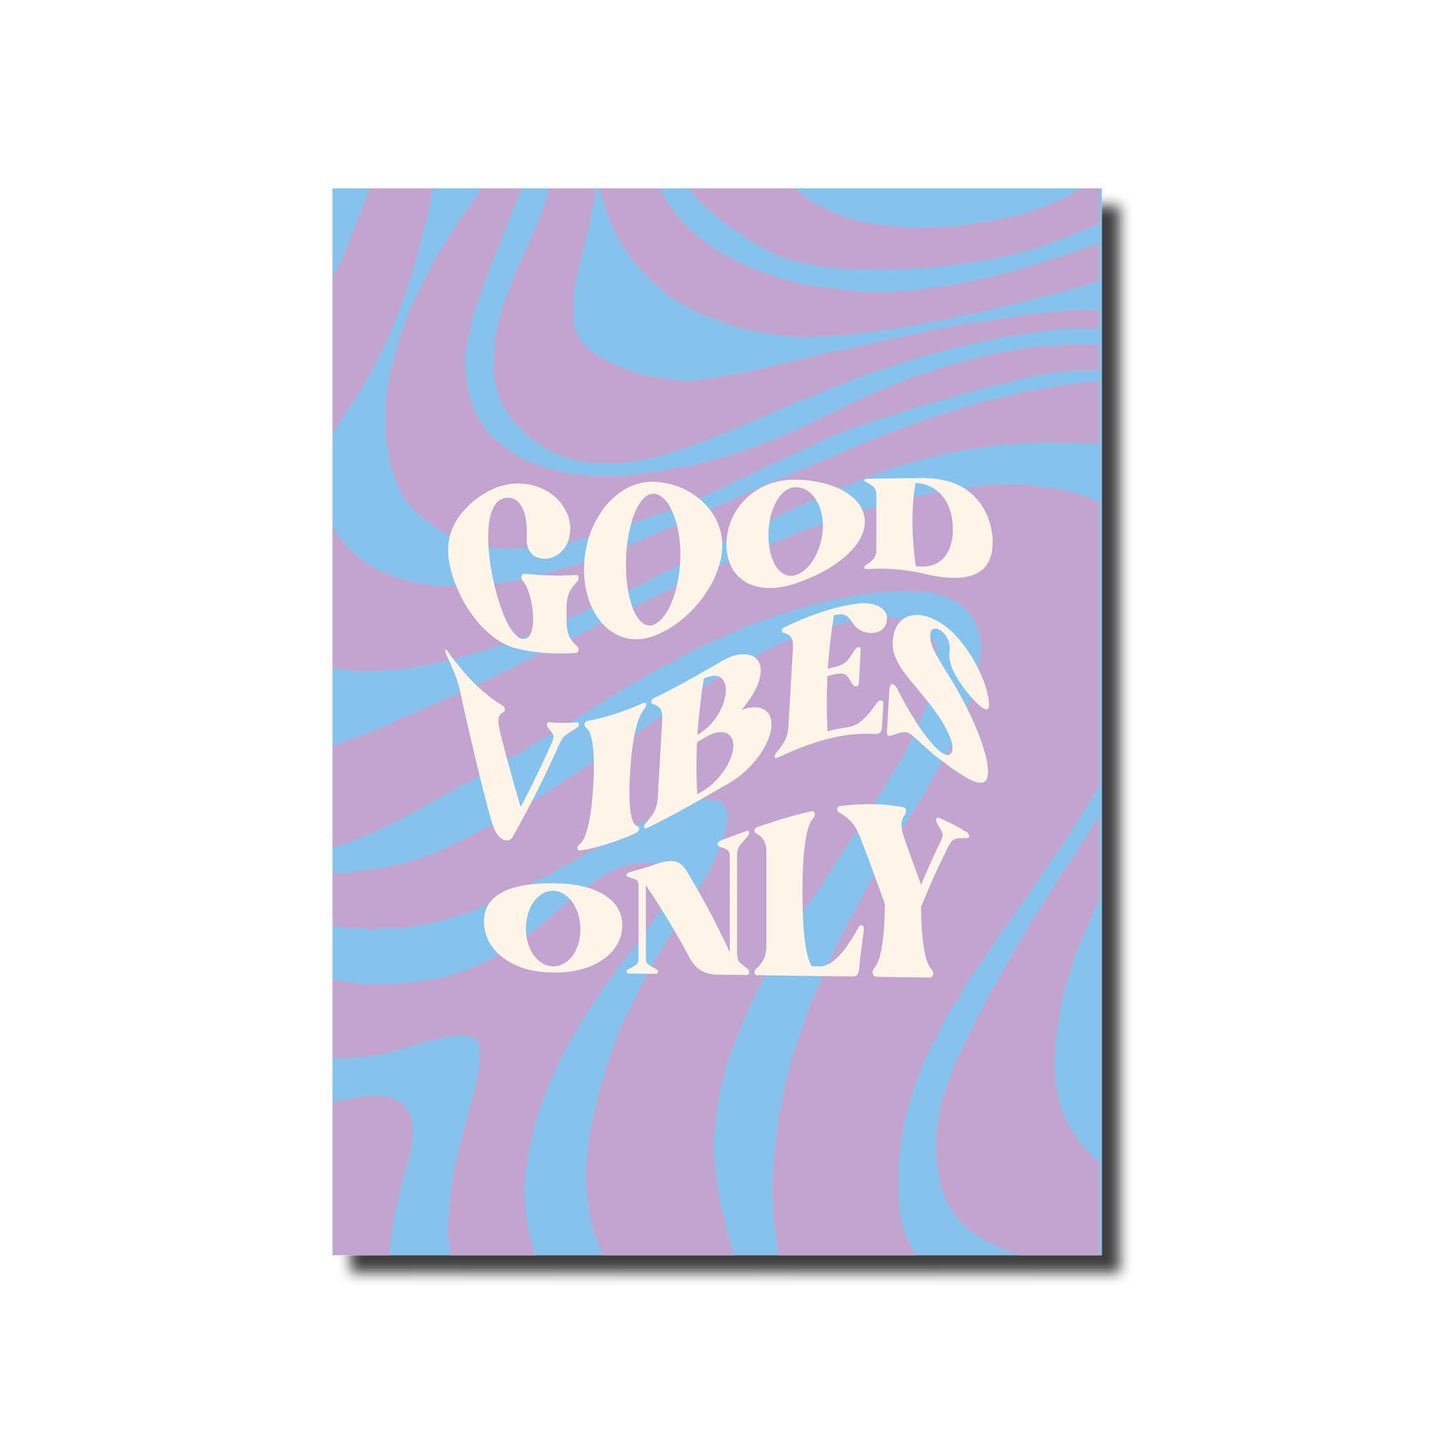 Good vibes only A3 poster